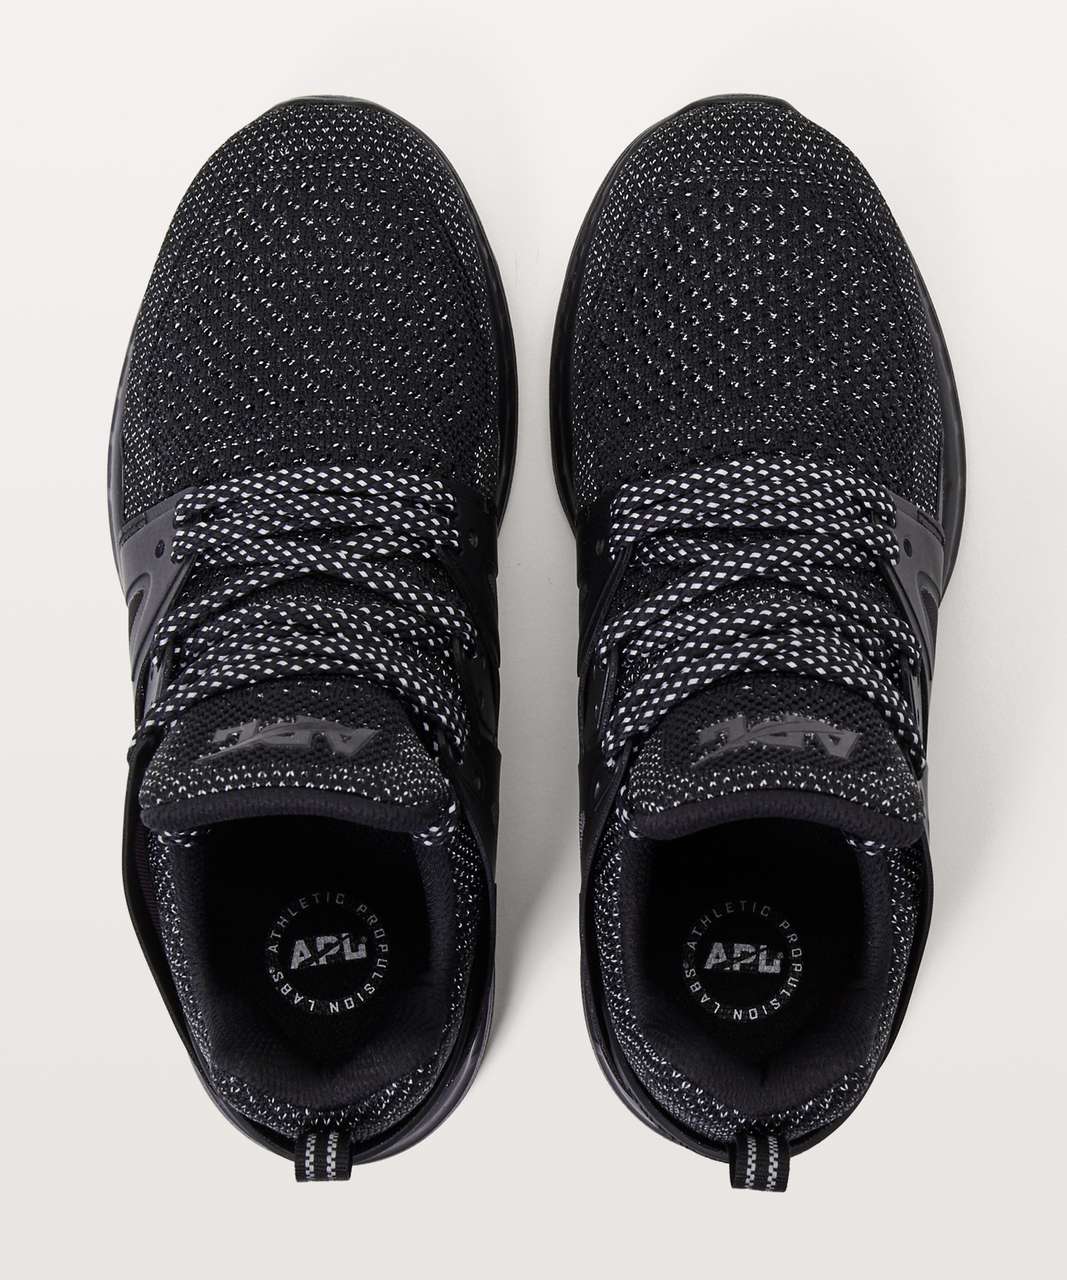 lululemon shoes release date usa